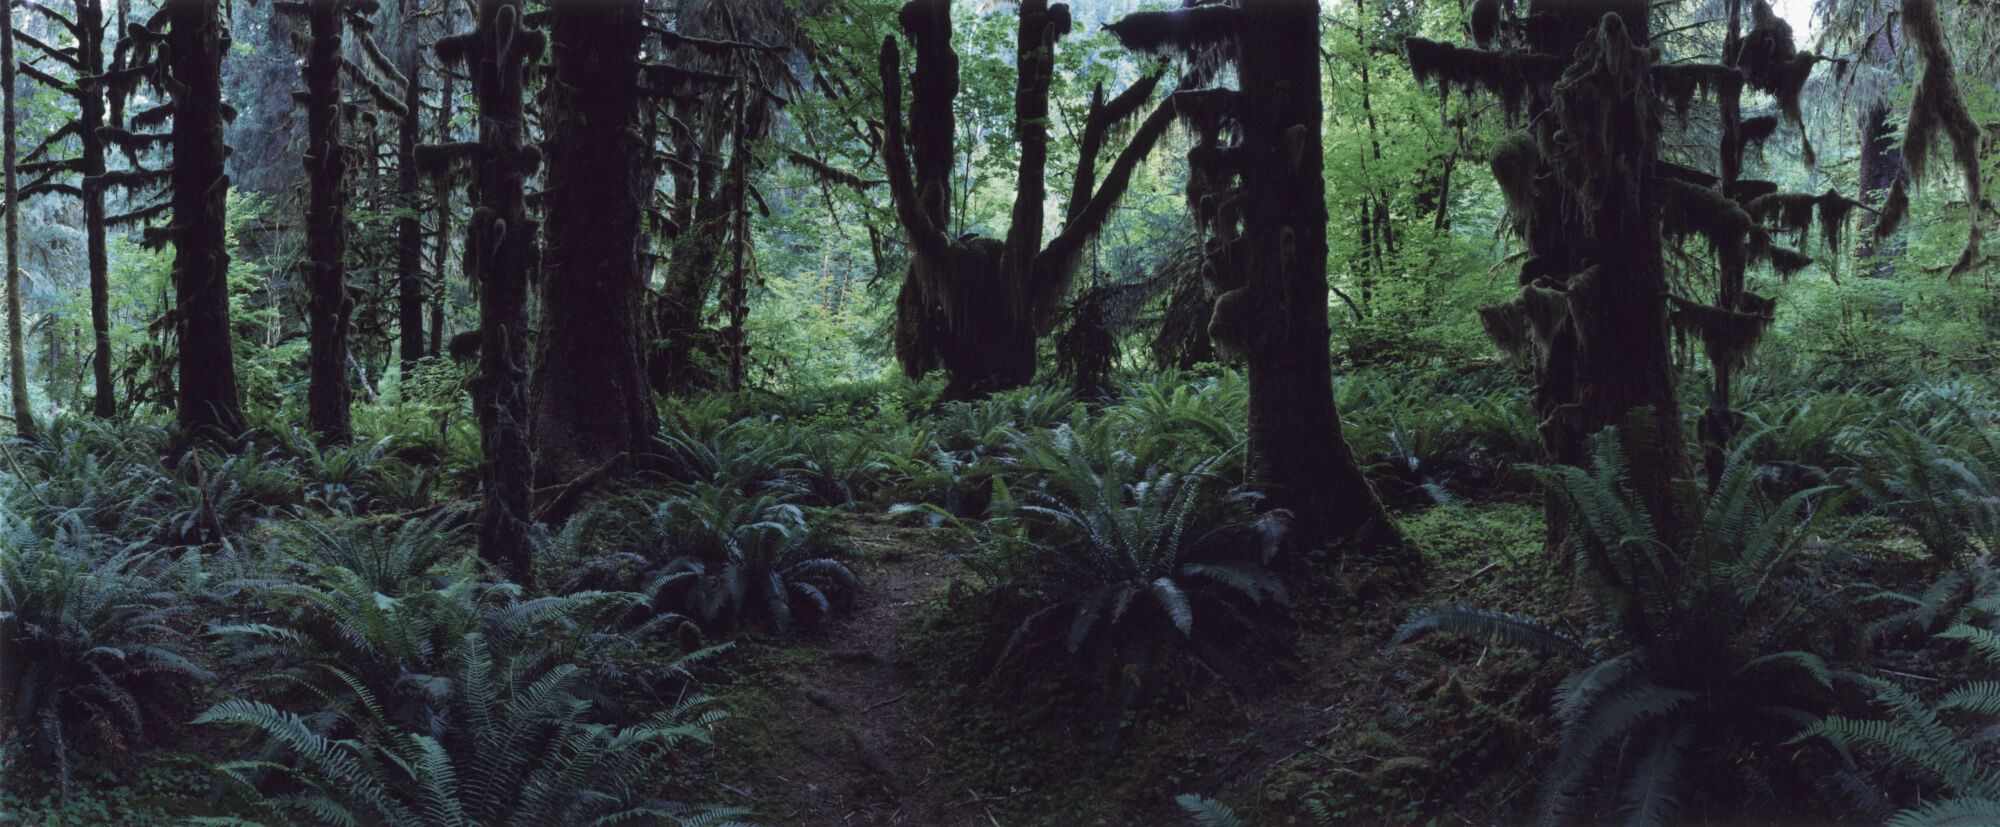 The Wick - Regarding Forests Hoh Rain Forest 3 Olympic National Park 2019. Chrystel Lebas